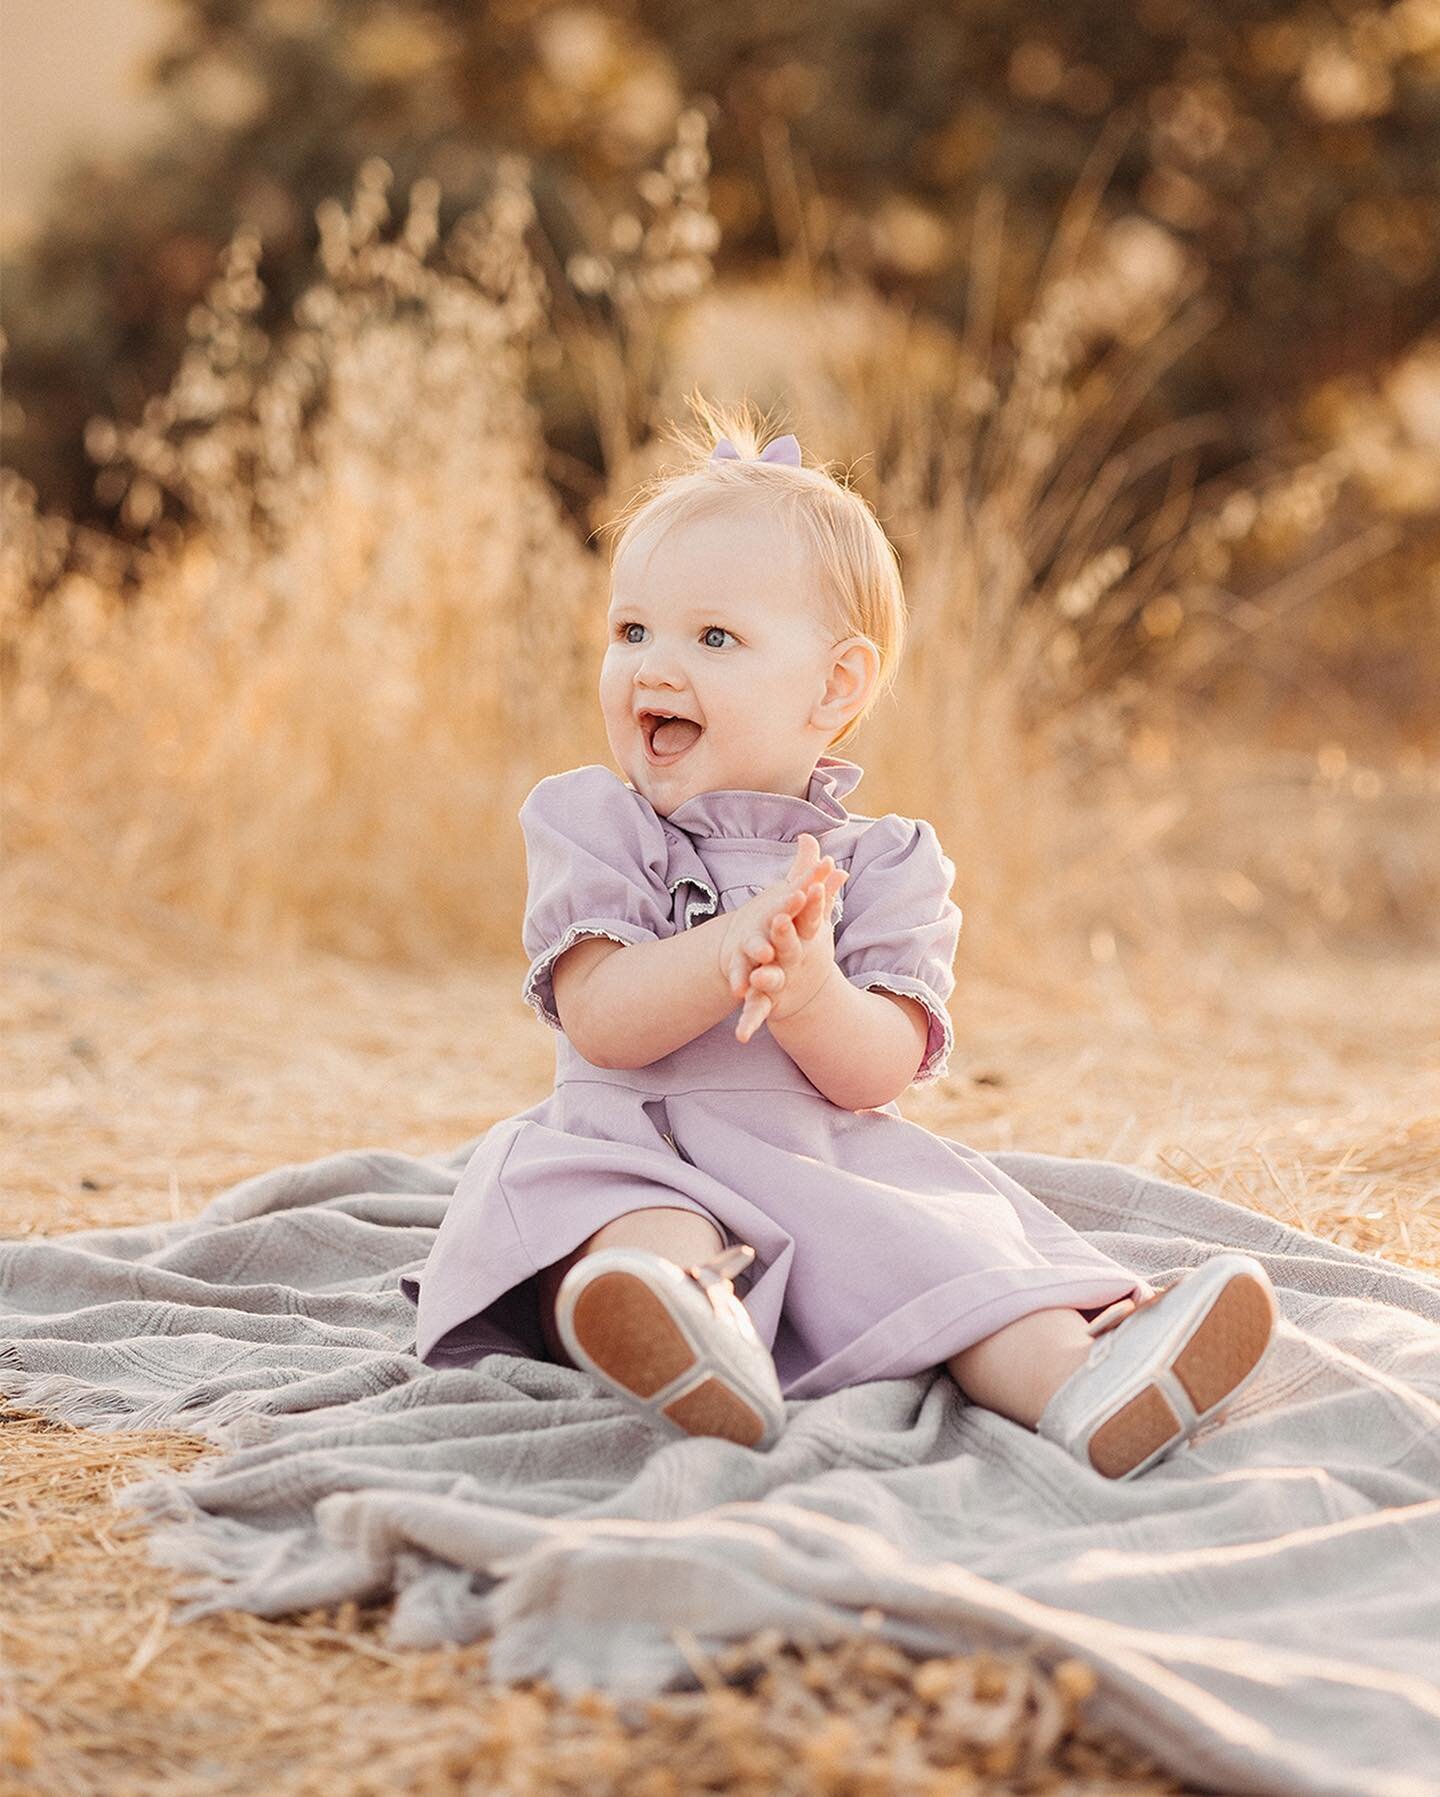 fall sessions in full swing! 😍

#bayareafamilyphotographer ⁠
#bayareanewbornphotographer
#bayareaphotographer ⁠
#eastbayphotographer⁠
#eastbayfamilyphotographer⁠
#walnutcreekphotographer 
#walnutcreekfamilyphotographer
#sanfranciscophotographer 
#sa